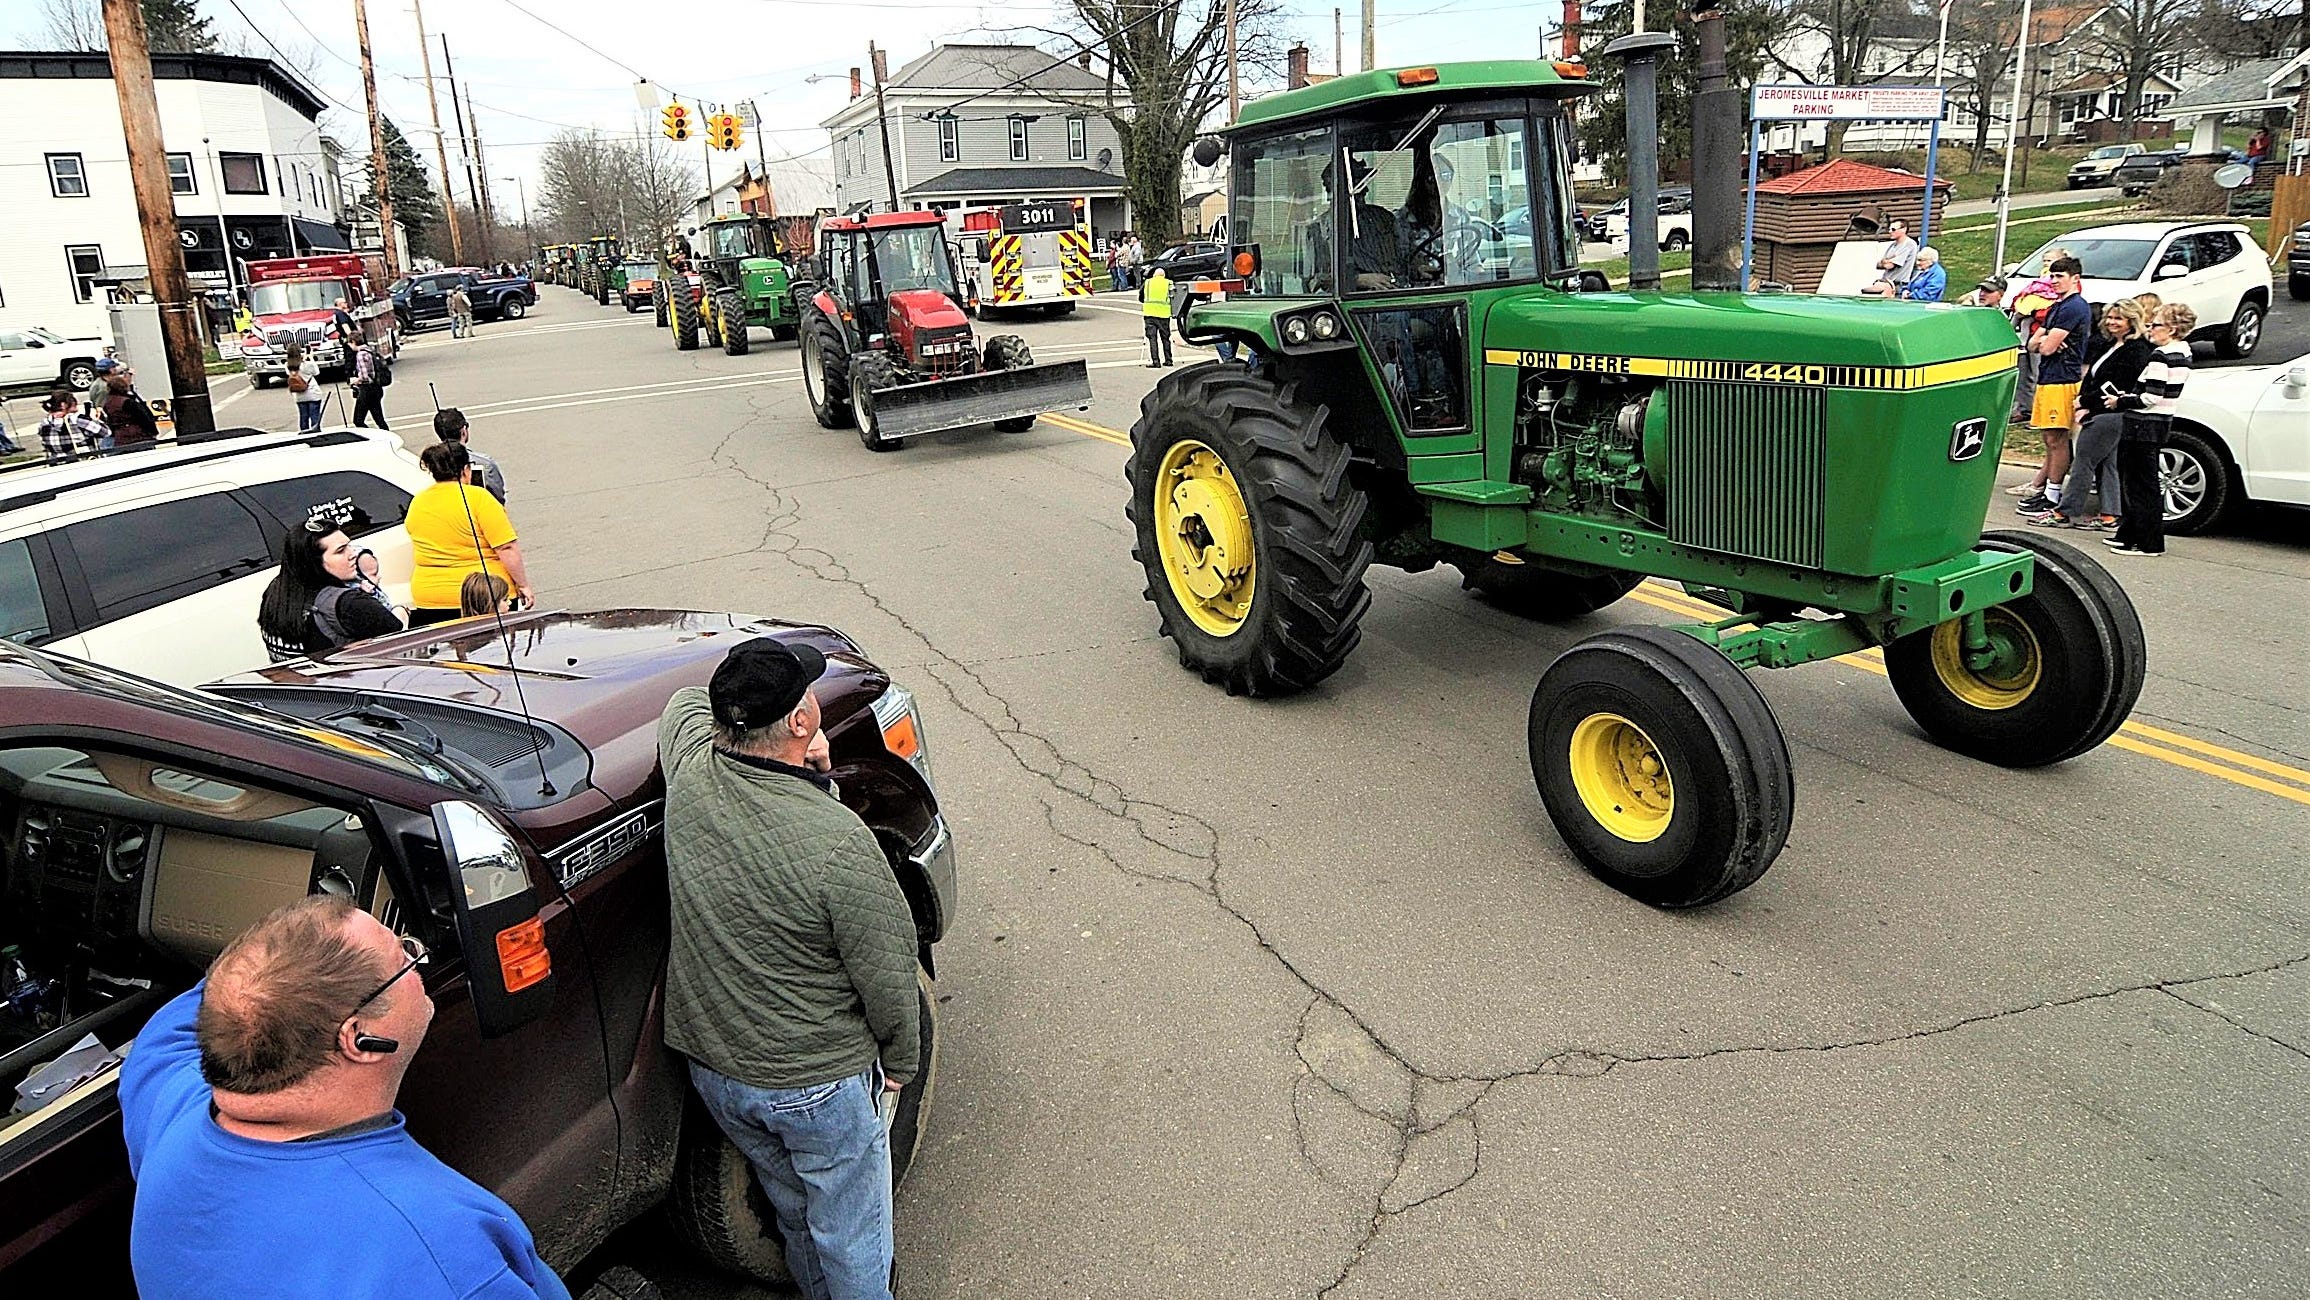  Remembering a 'Deere' friend: Village's tractor procession honors area farmer 